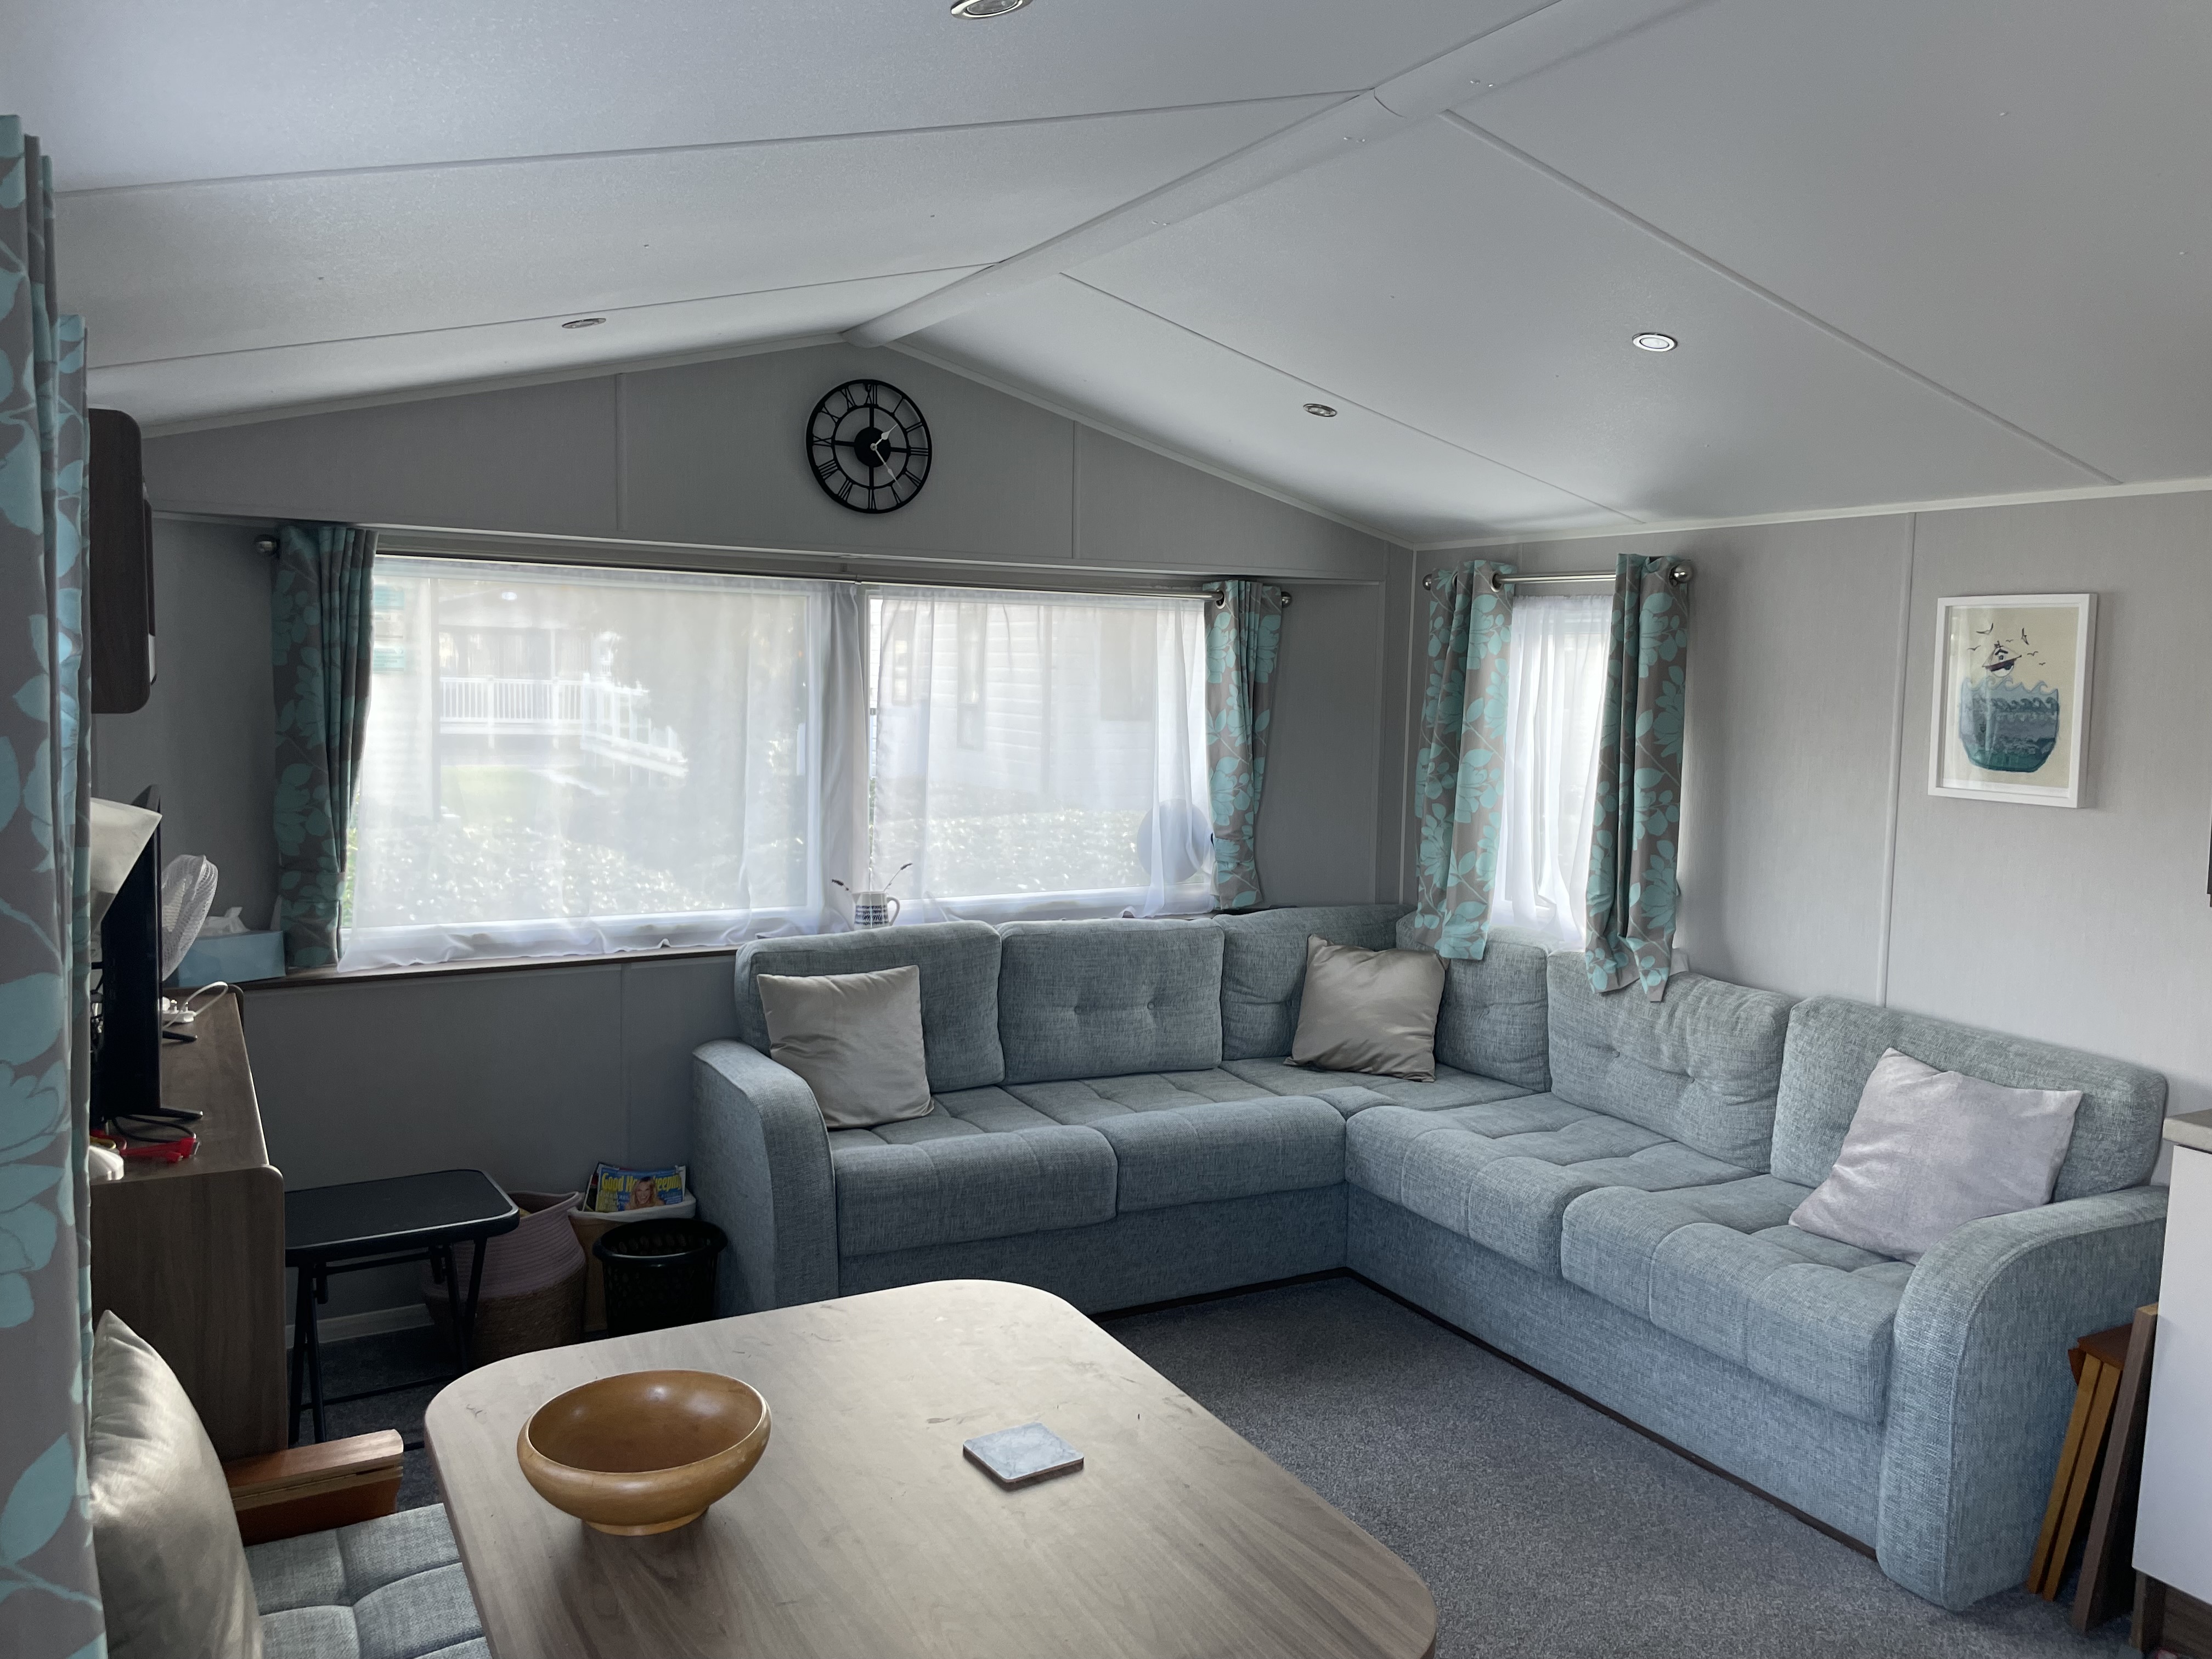 Picture of Willerby Seasons 3 bedroom 8 berth At Kiln Park Tenby